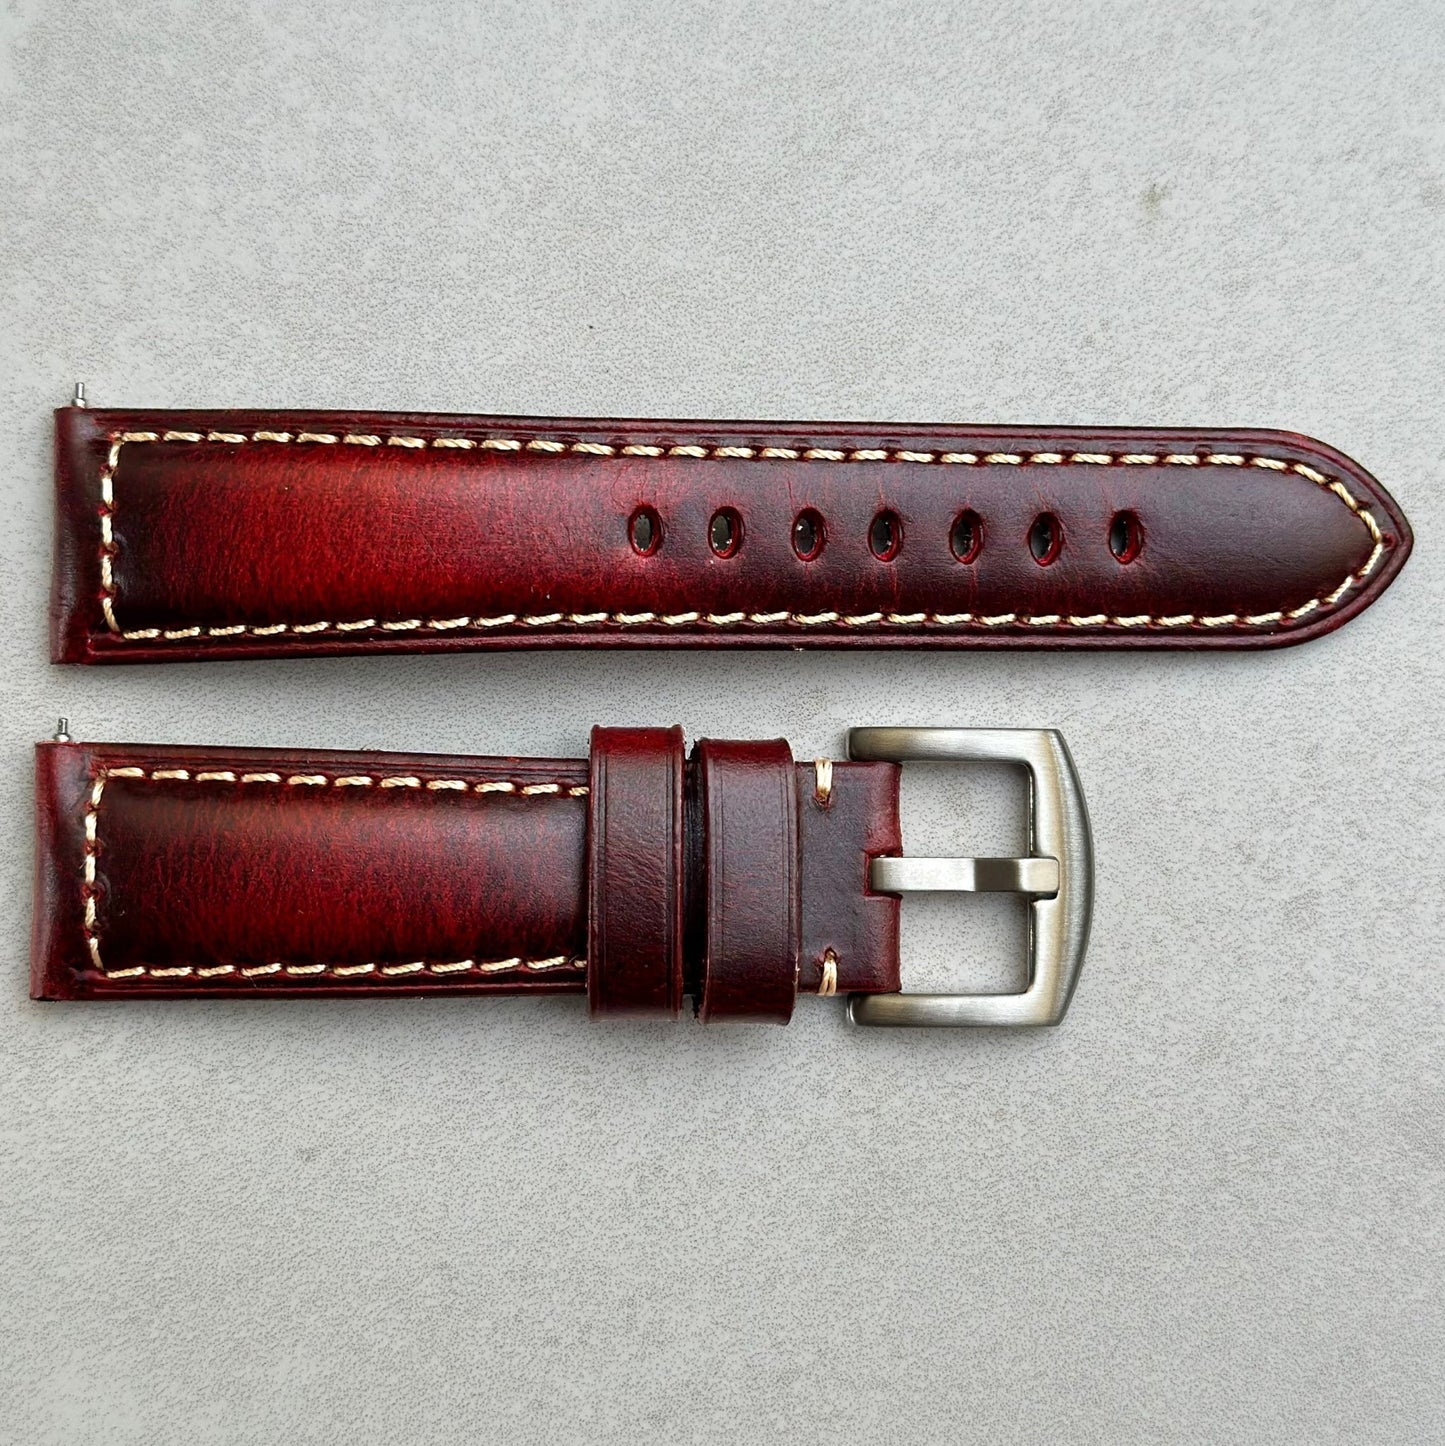 Birds eye view shot of the Berlin burgundy full grain leather watch strap. Placed on a Grey background.